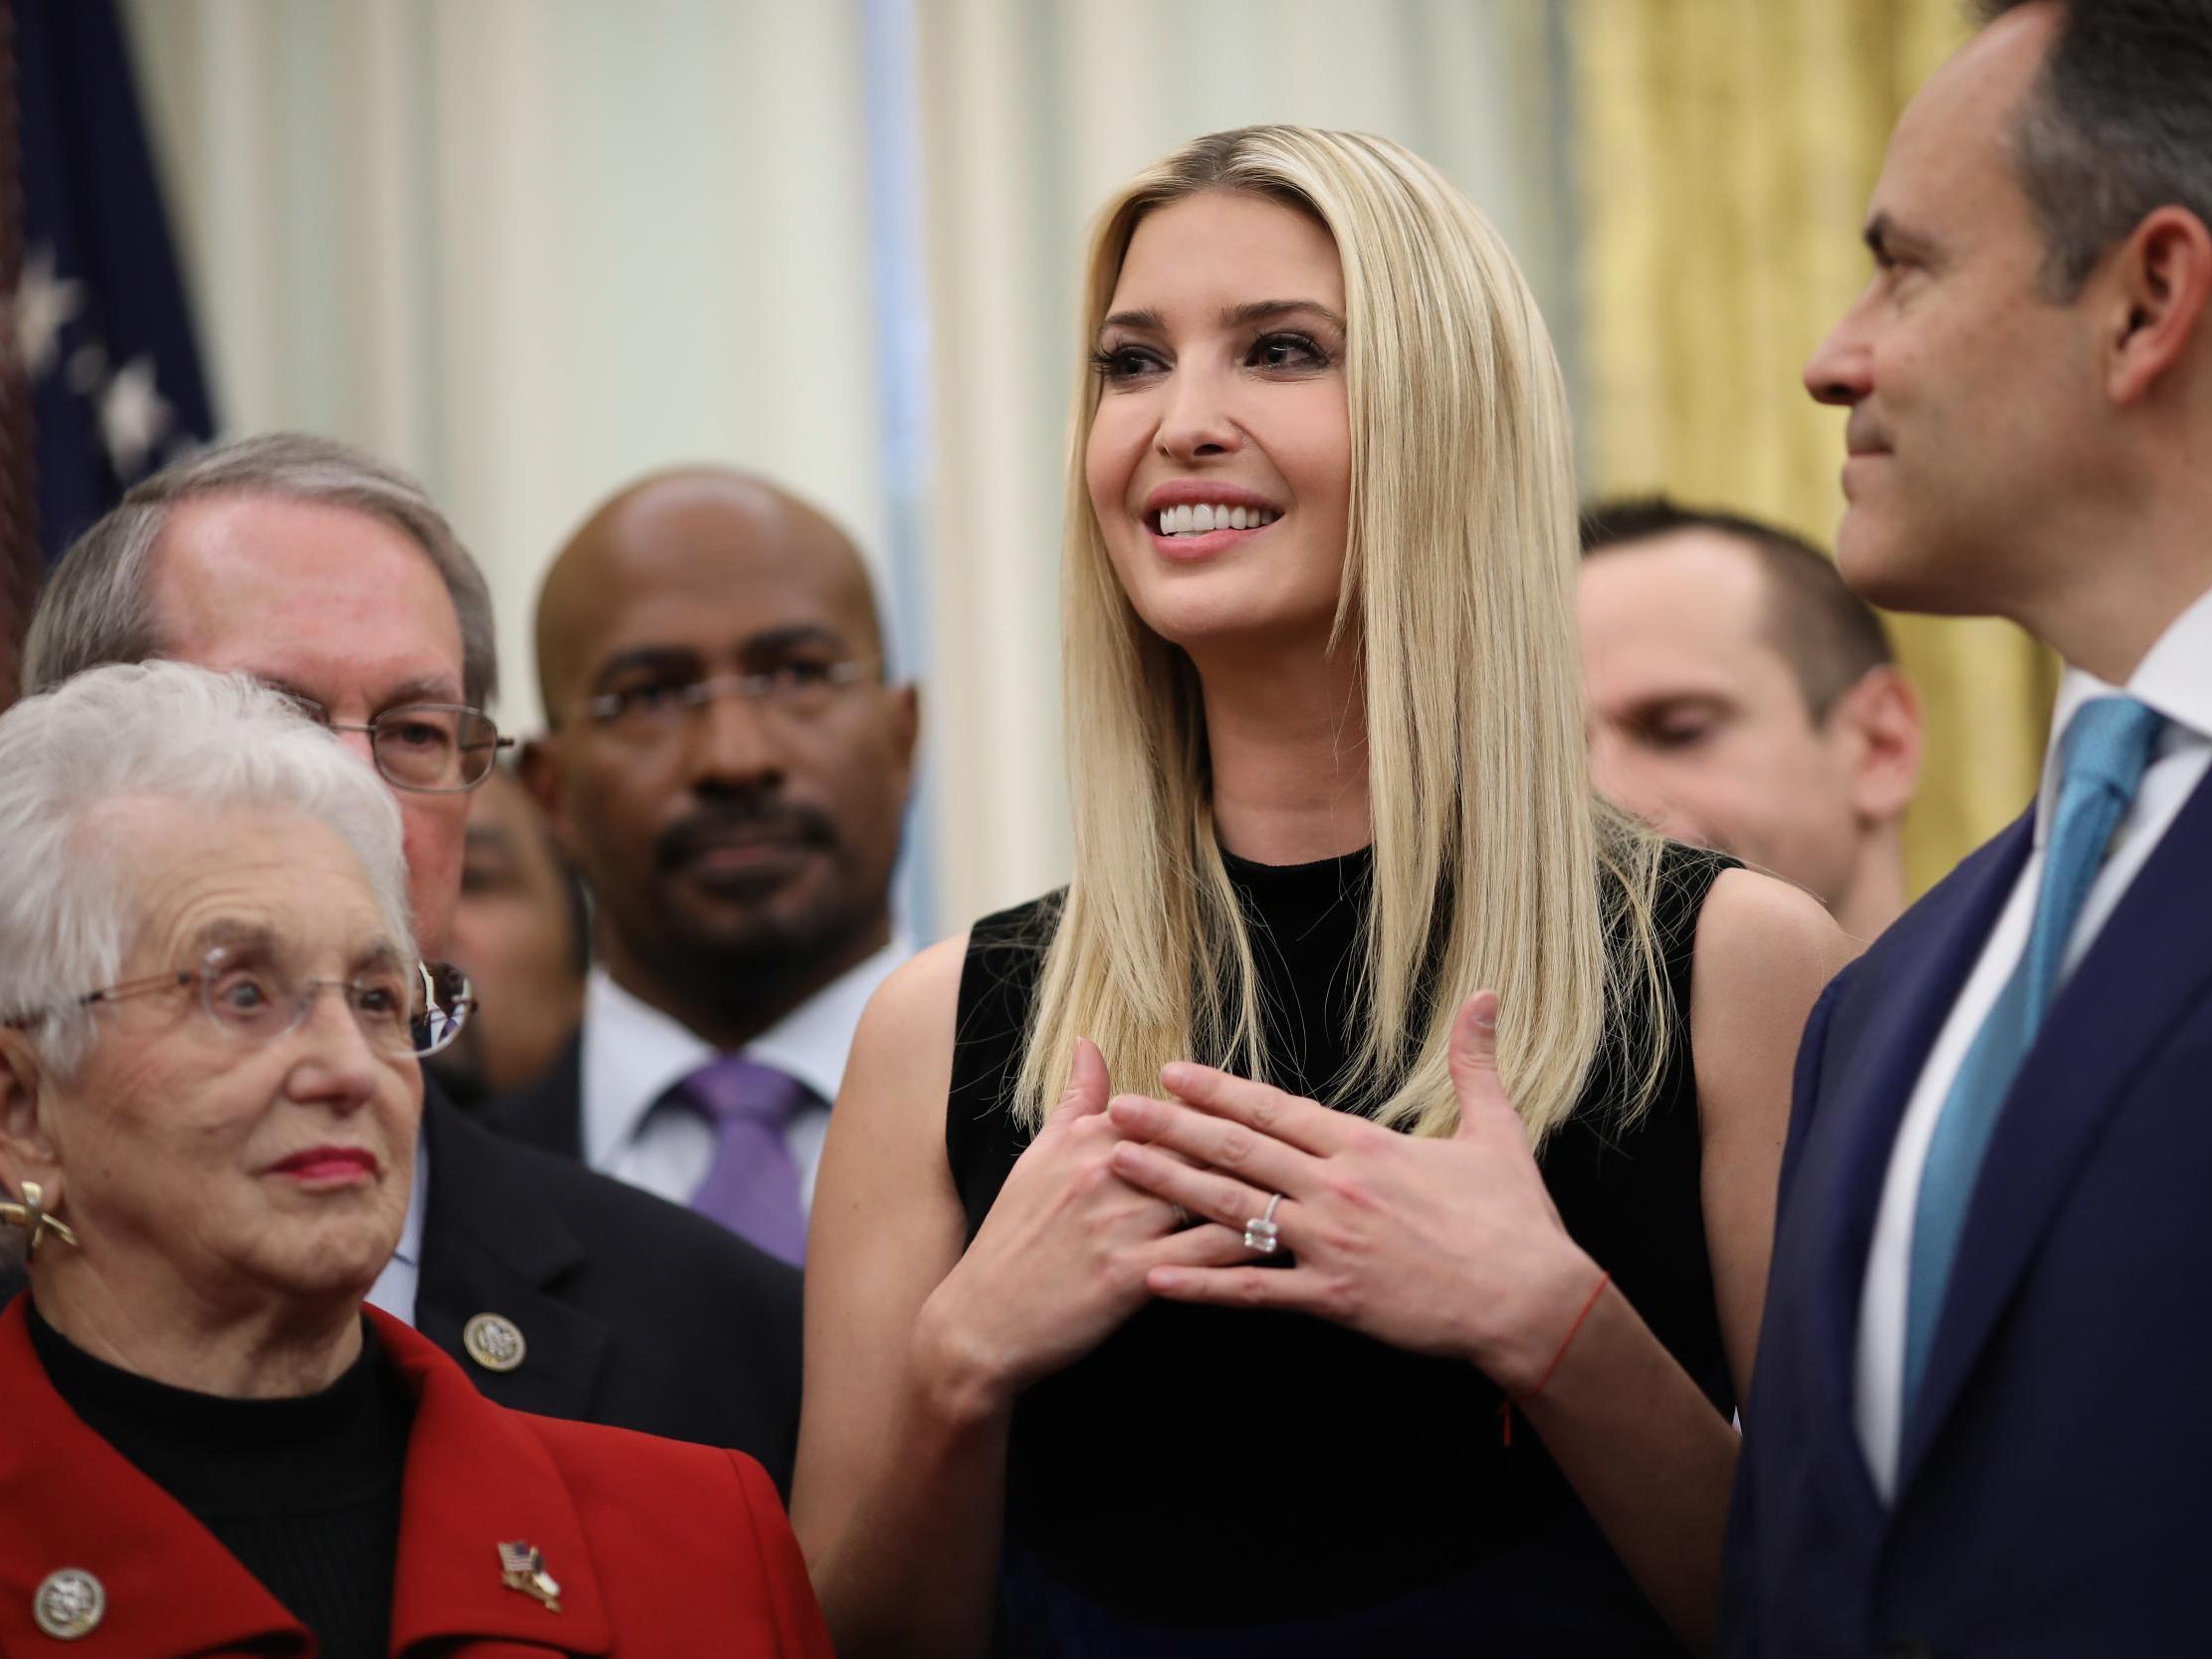 Ivanka Trump delivers remarks during the signing ceremony for the First Step Act and the Juvenile Justice Reform Act in the Oval Office of the White House, 21 December 2018, Washington, DC.